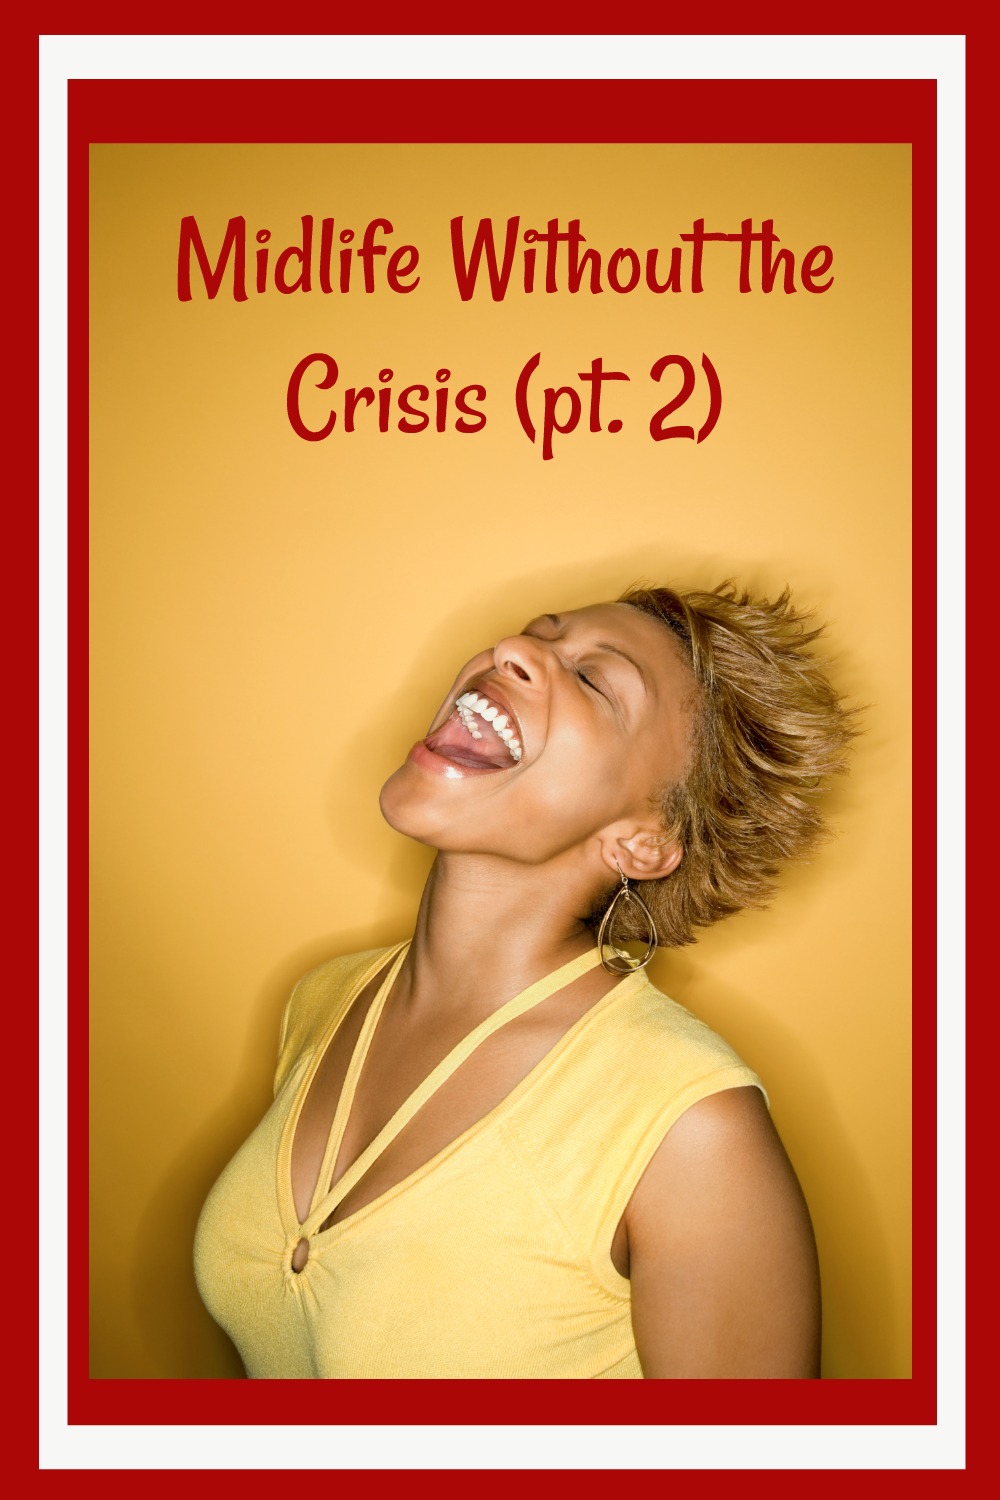 Midlife Without the Crisis (pt. 2)